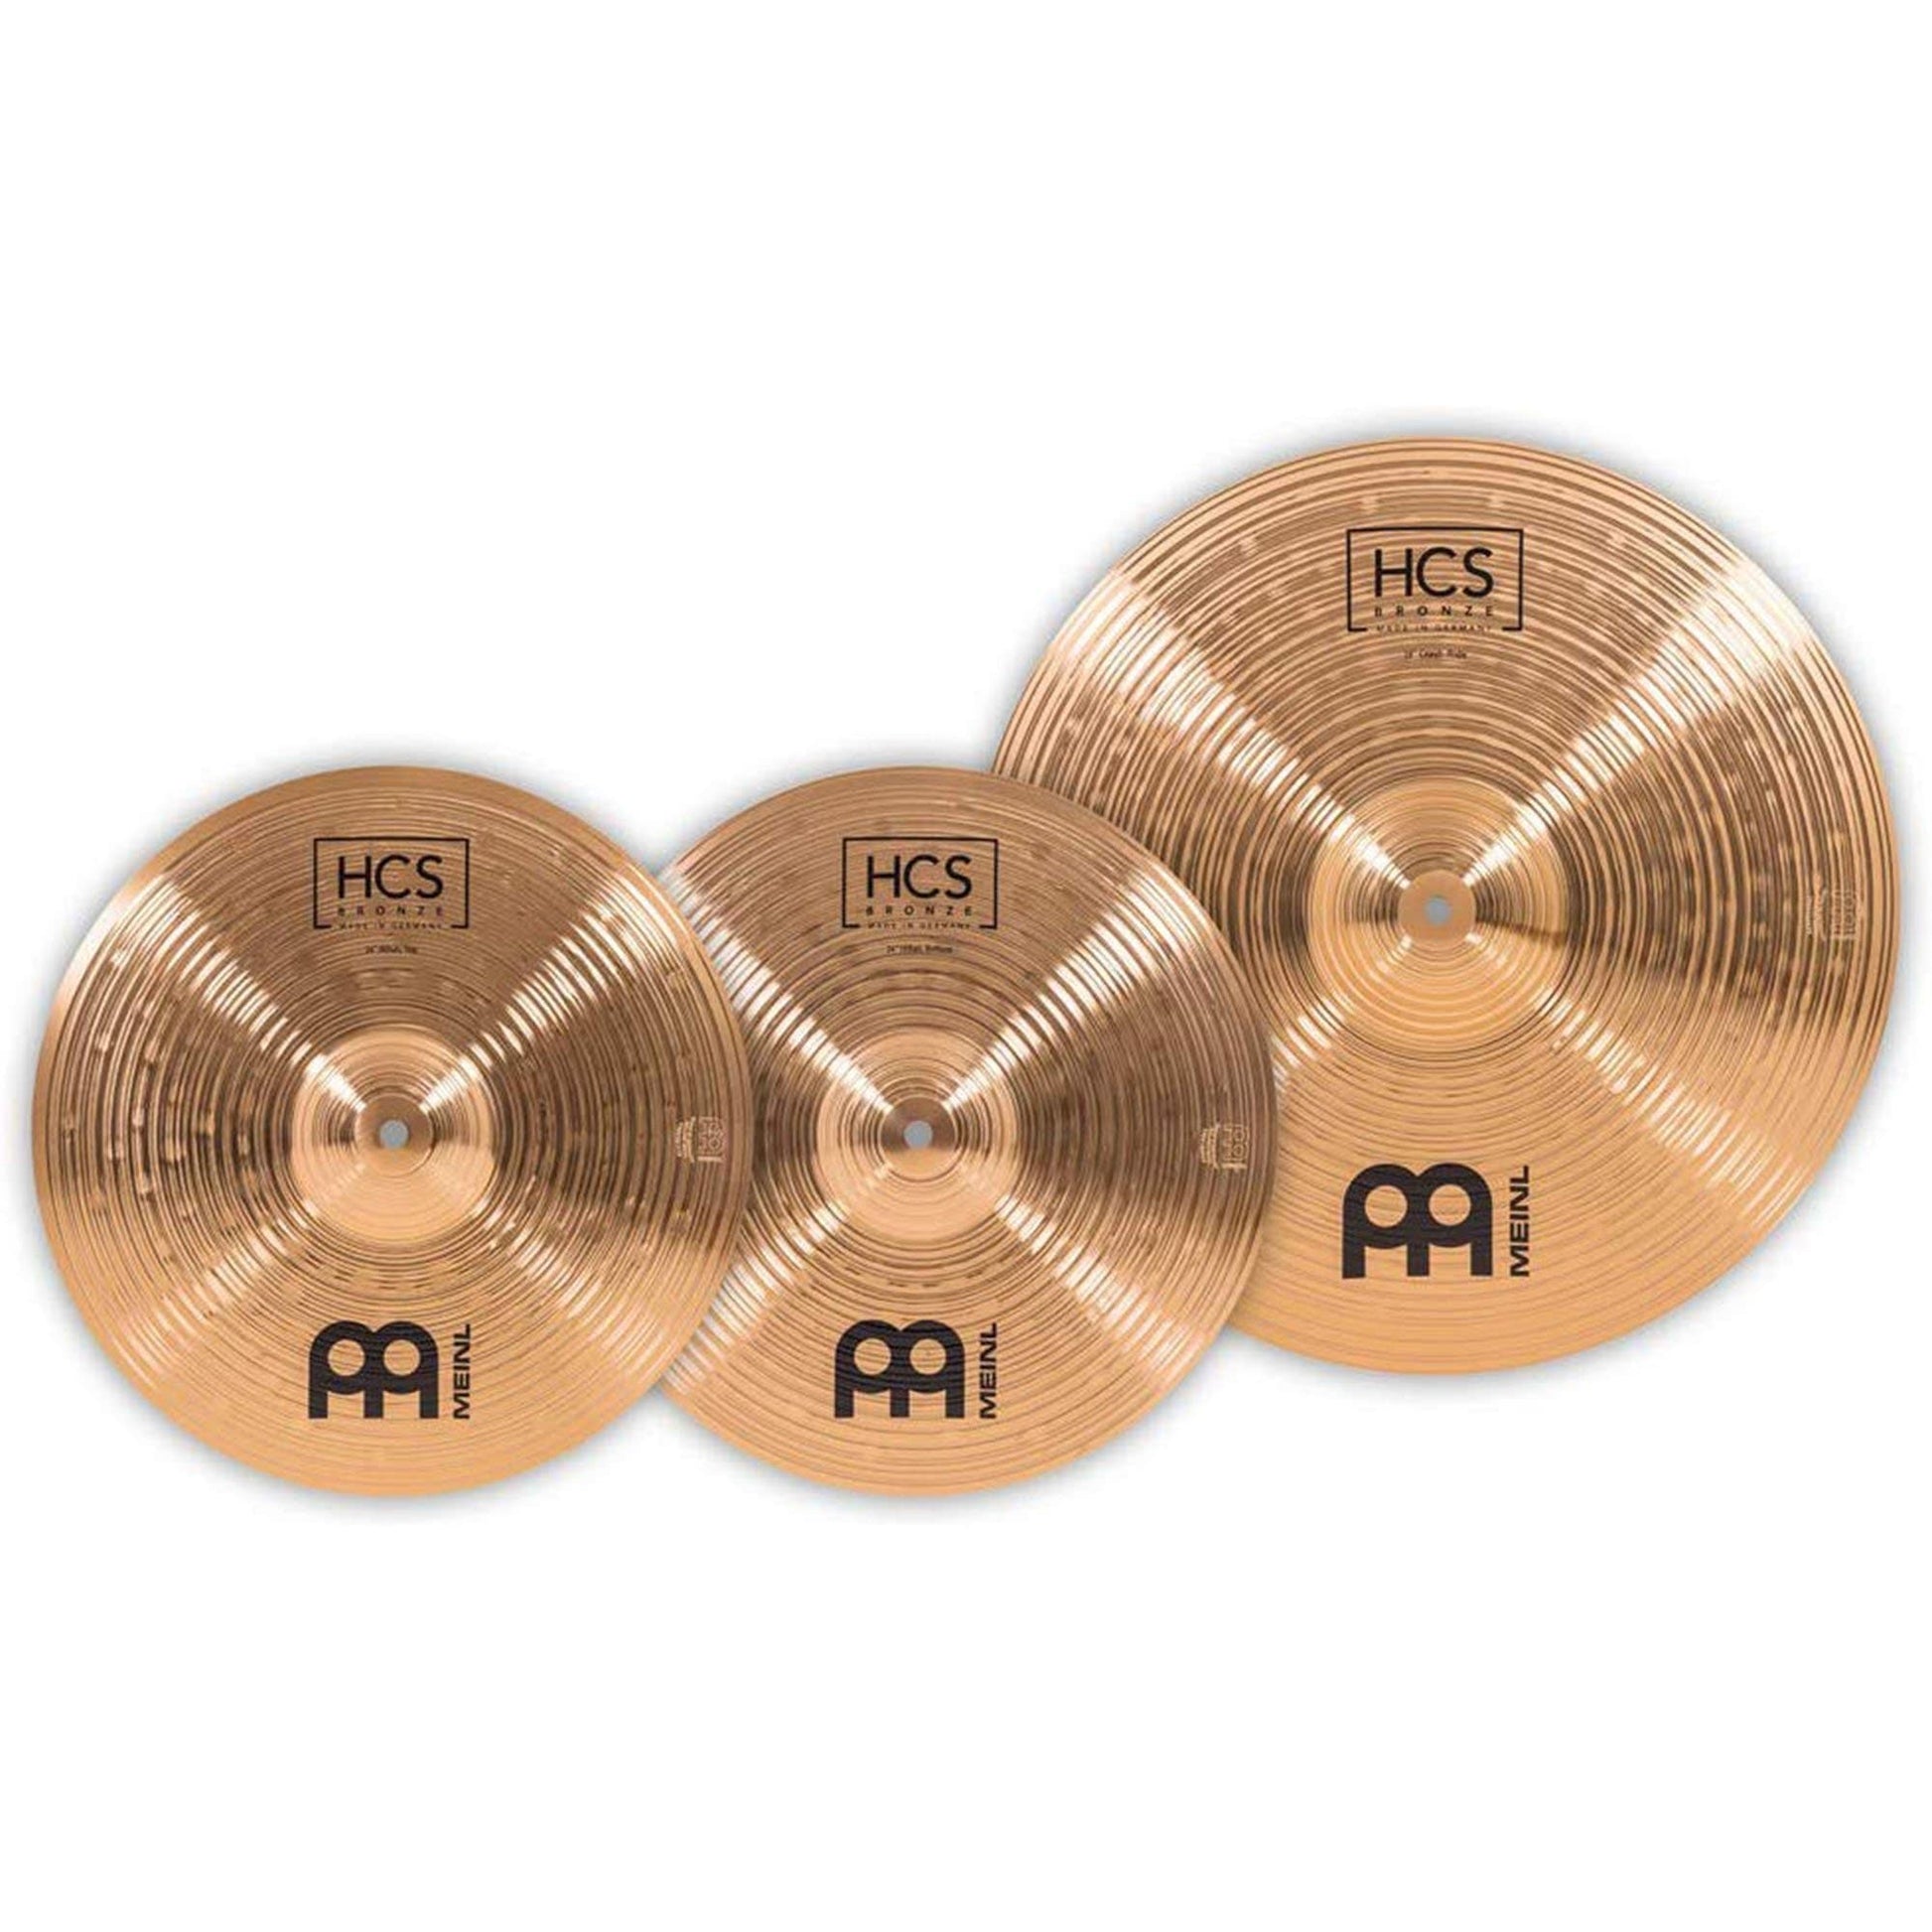 Meinl HCS Bronze 14/18 Basic Cymbal Set Drums and Percussion / Cymbals / Cymbal Packs